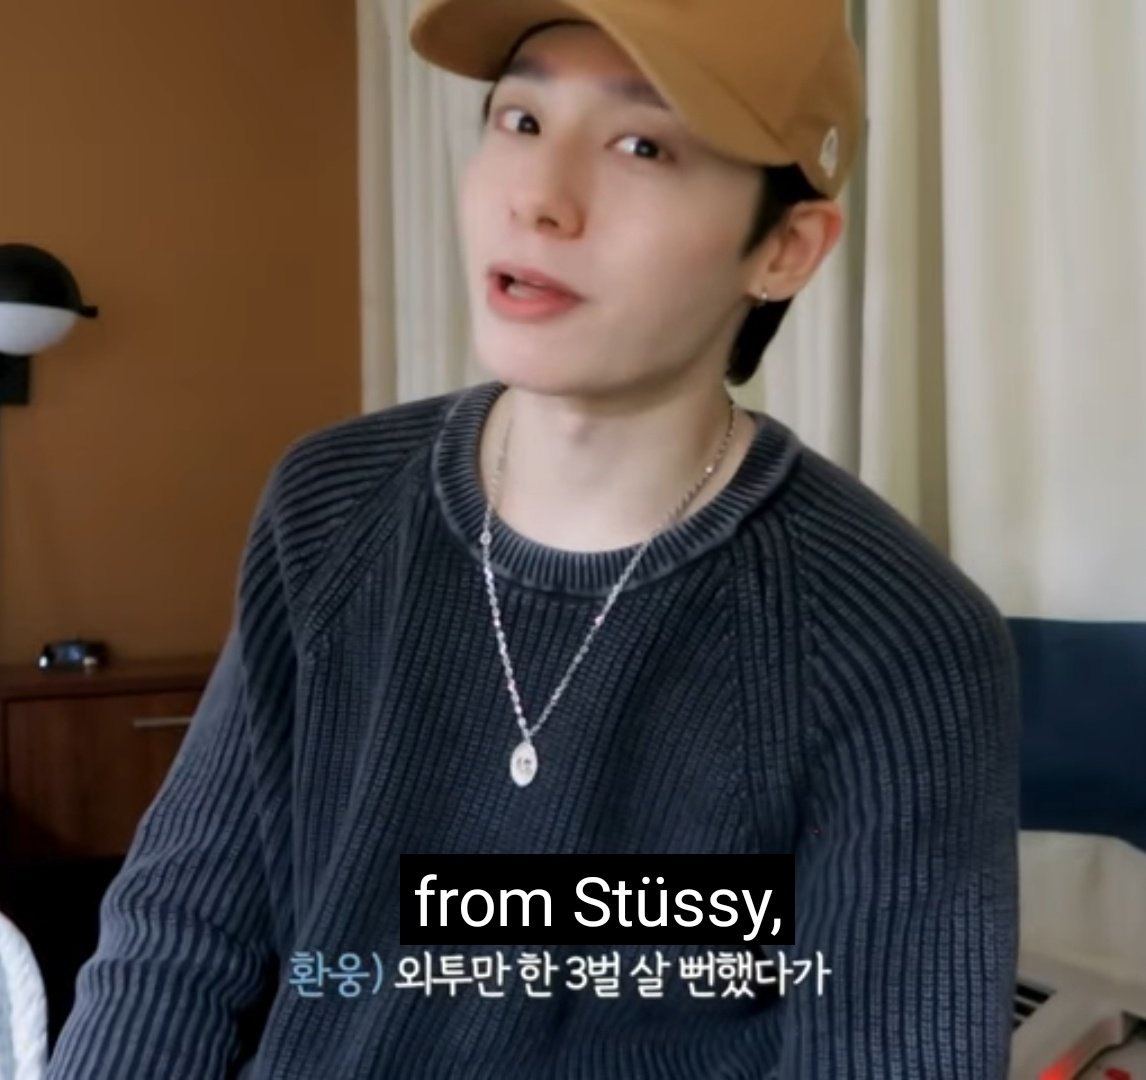 Ok he doesn't just wear Stussy, he really likes Stussy 😆